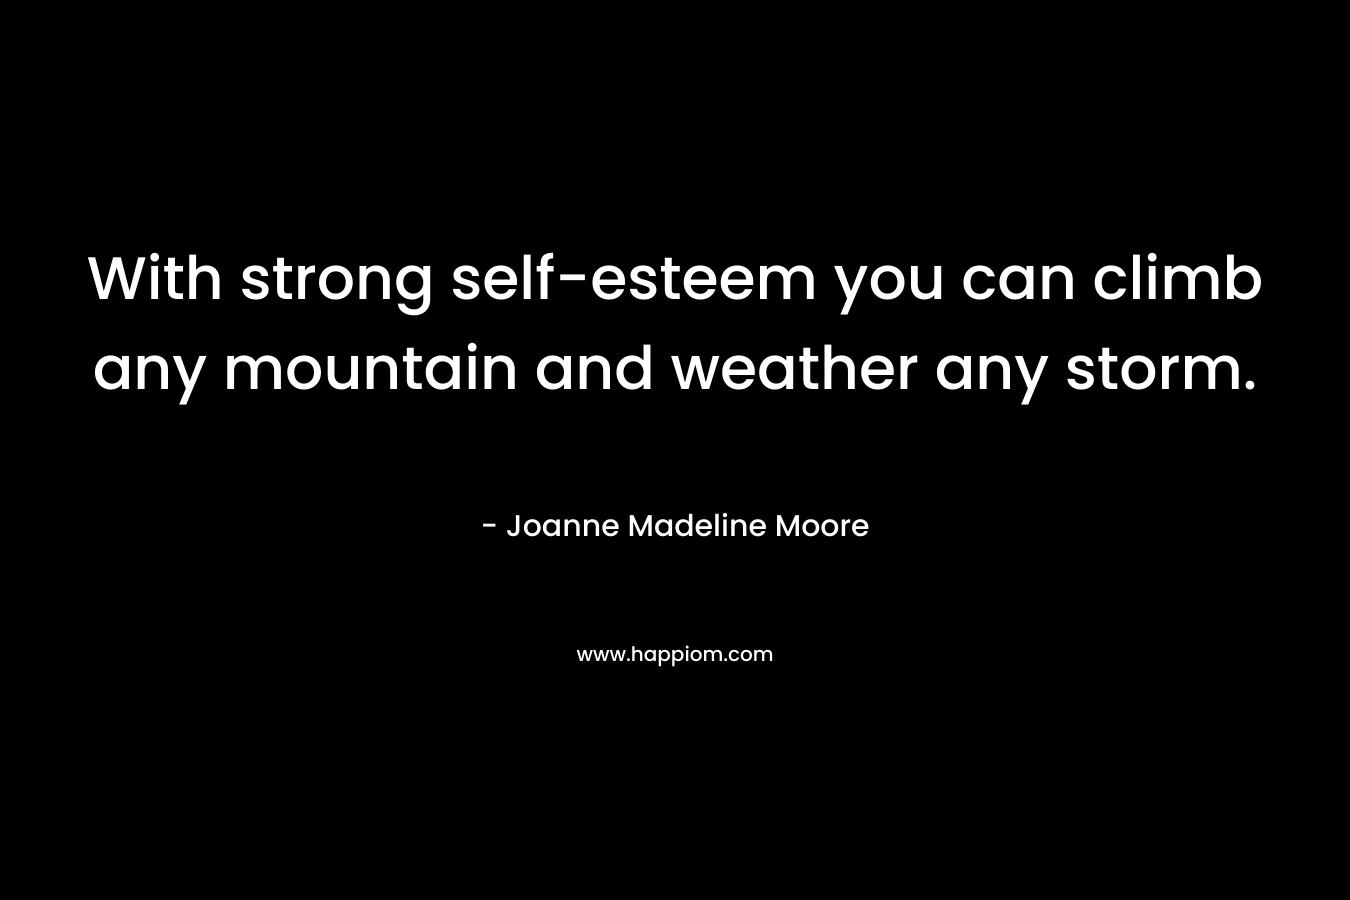 With strong self-esteem you can climb any mountain and weather any storm.